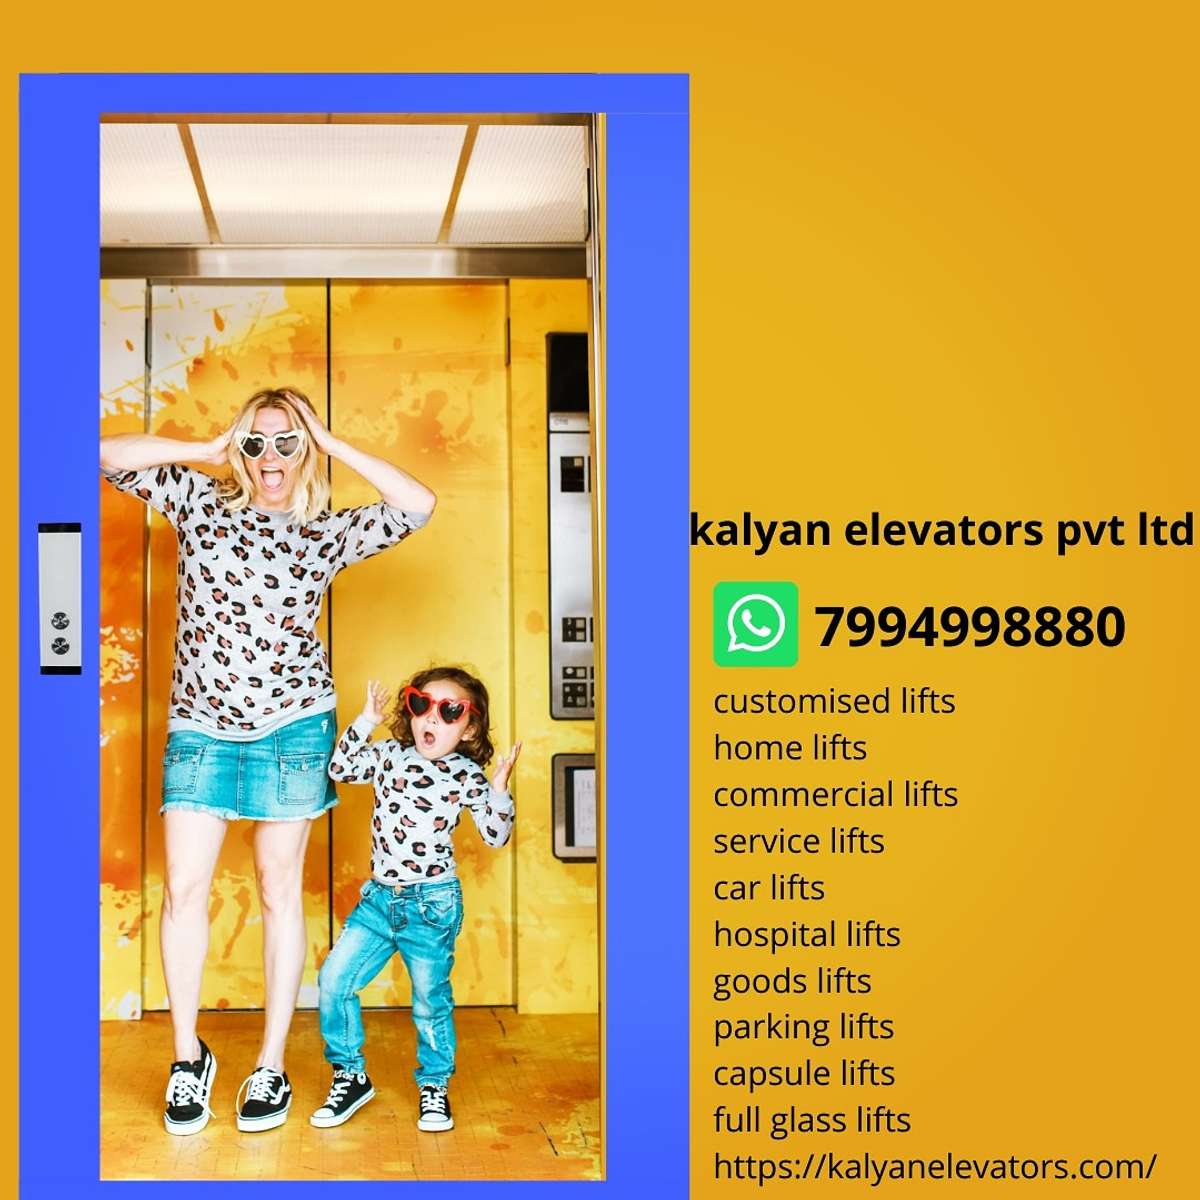 related home lifts contact please